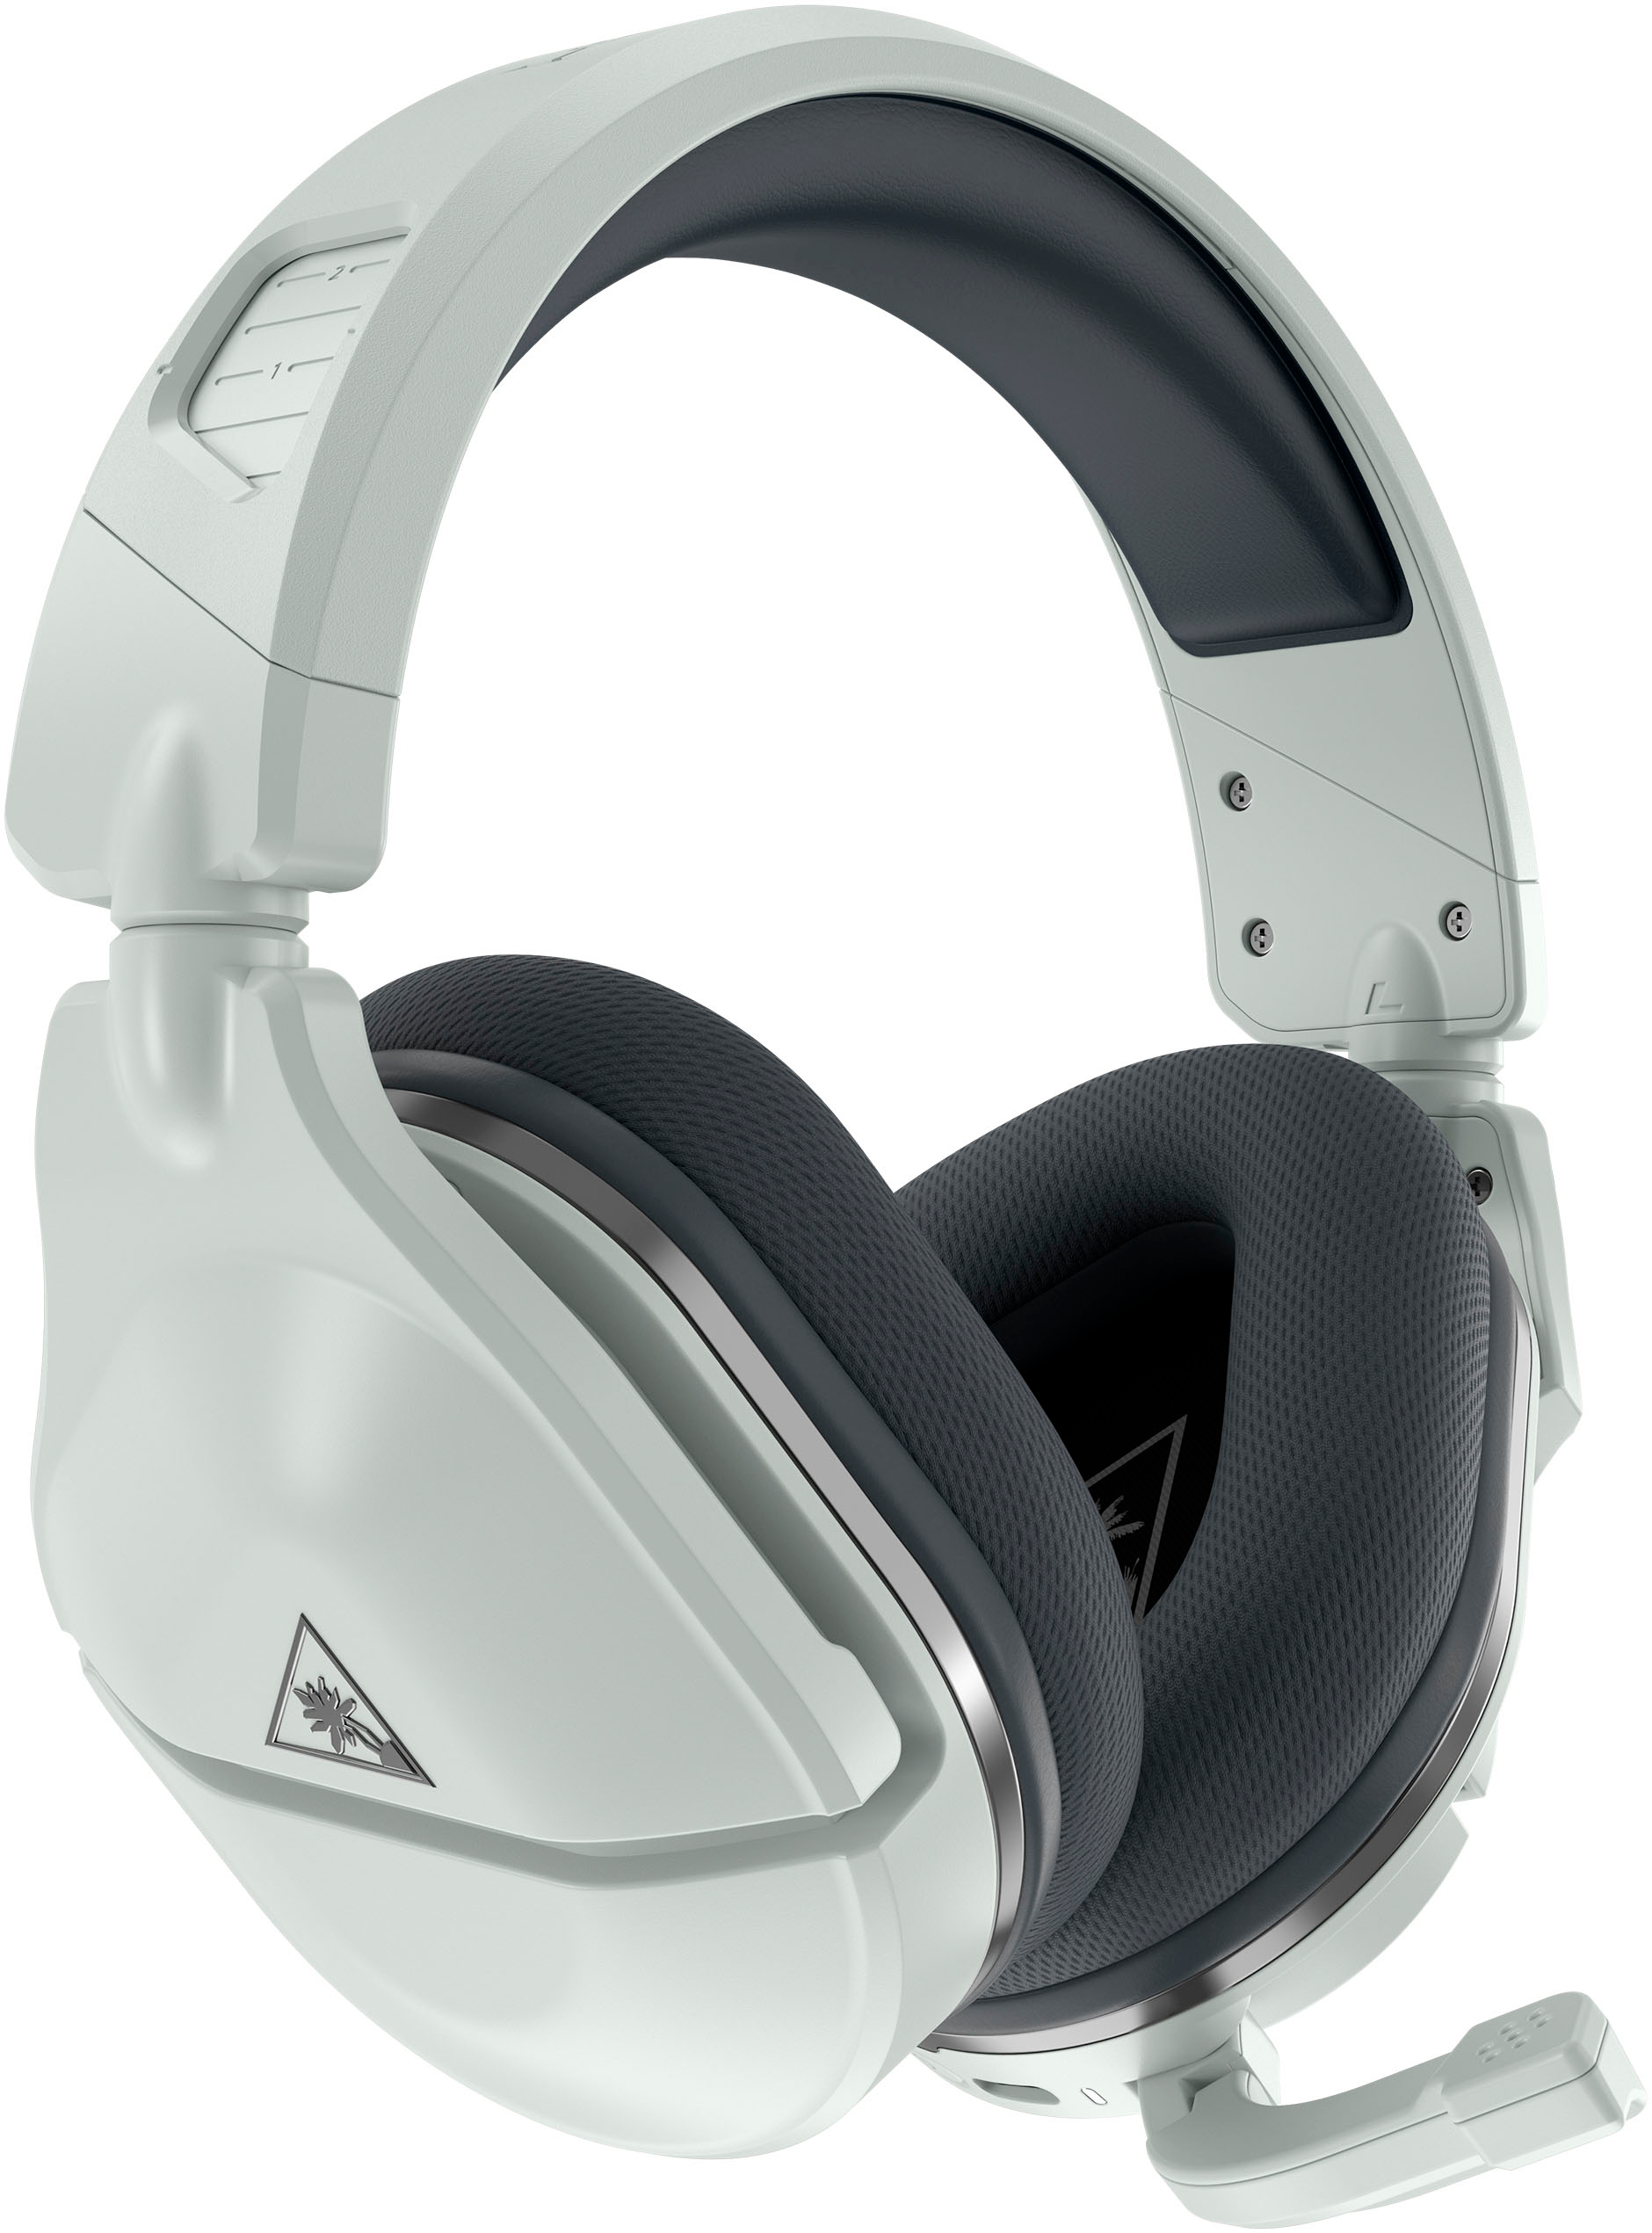 Left View: Turtle Beach - Stealth 600 Gen 2 USB PS Wireless Gaming Headset for PS5, PS4 - White